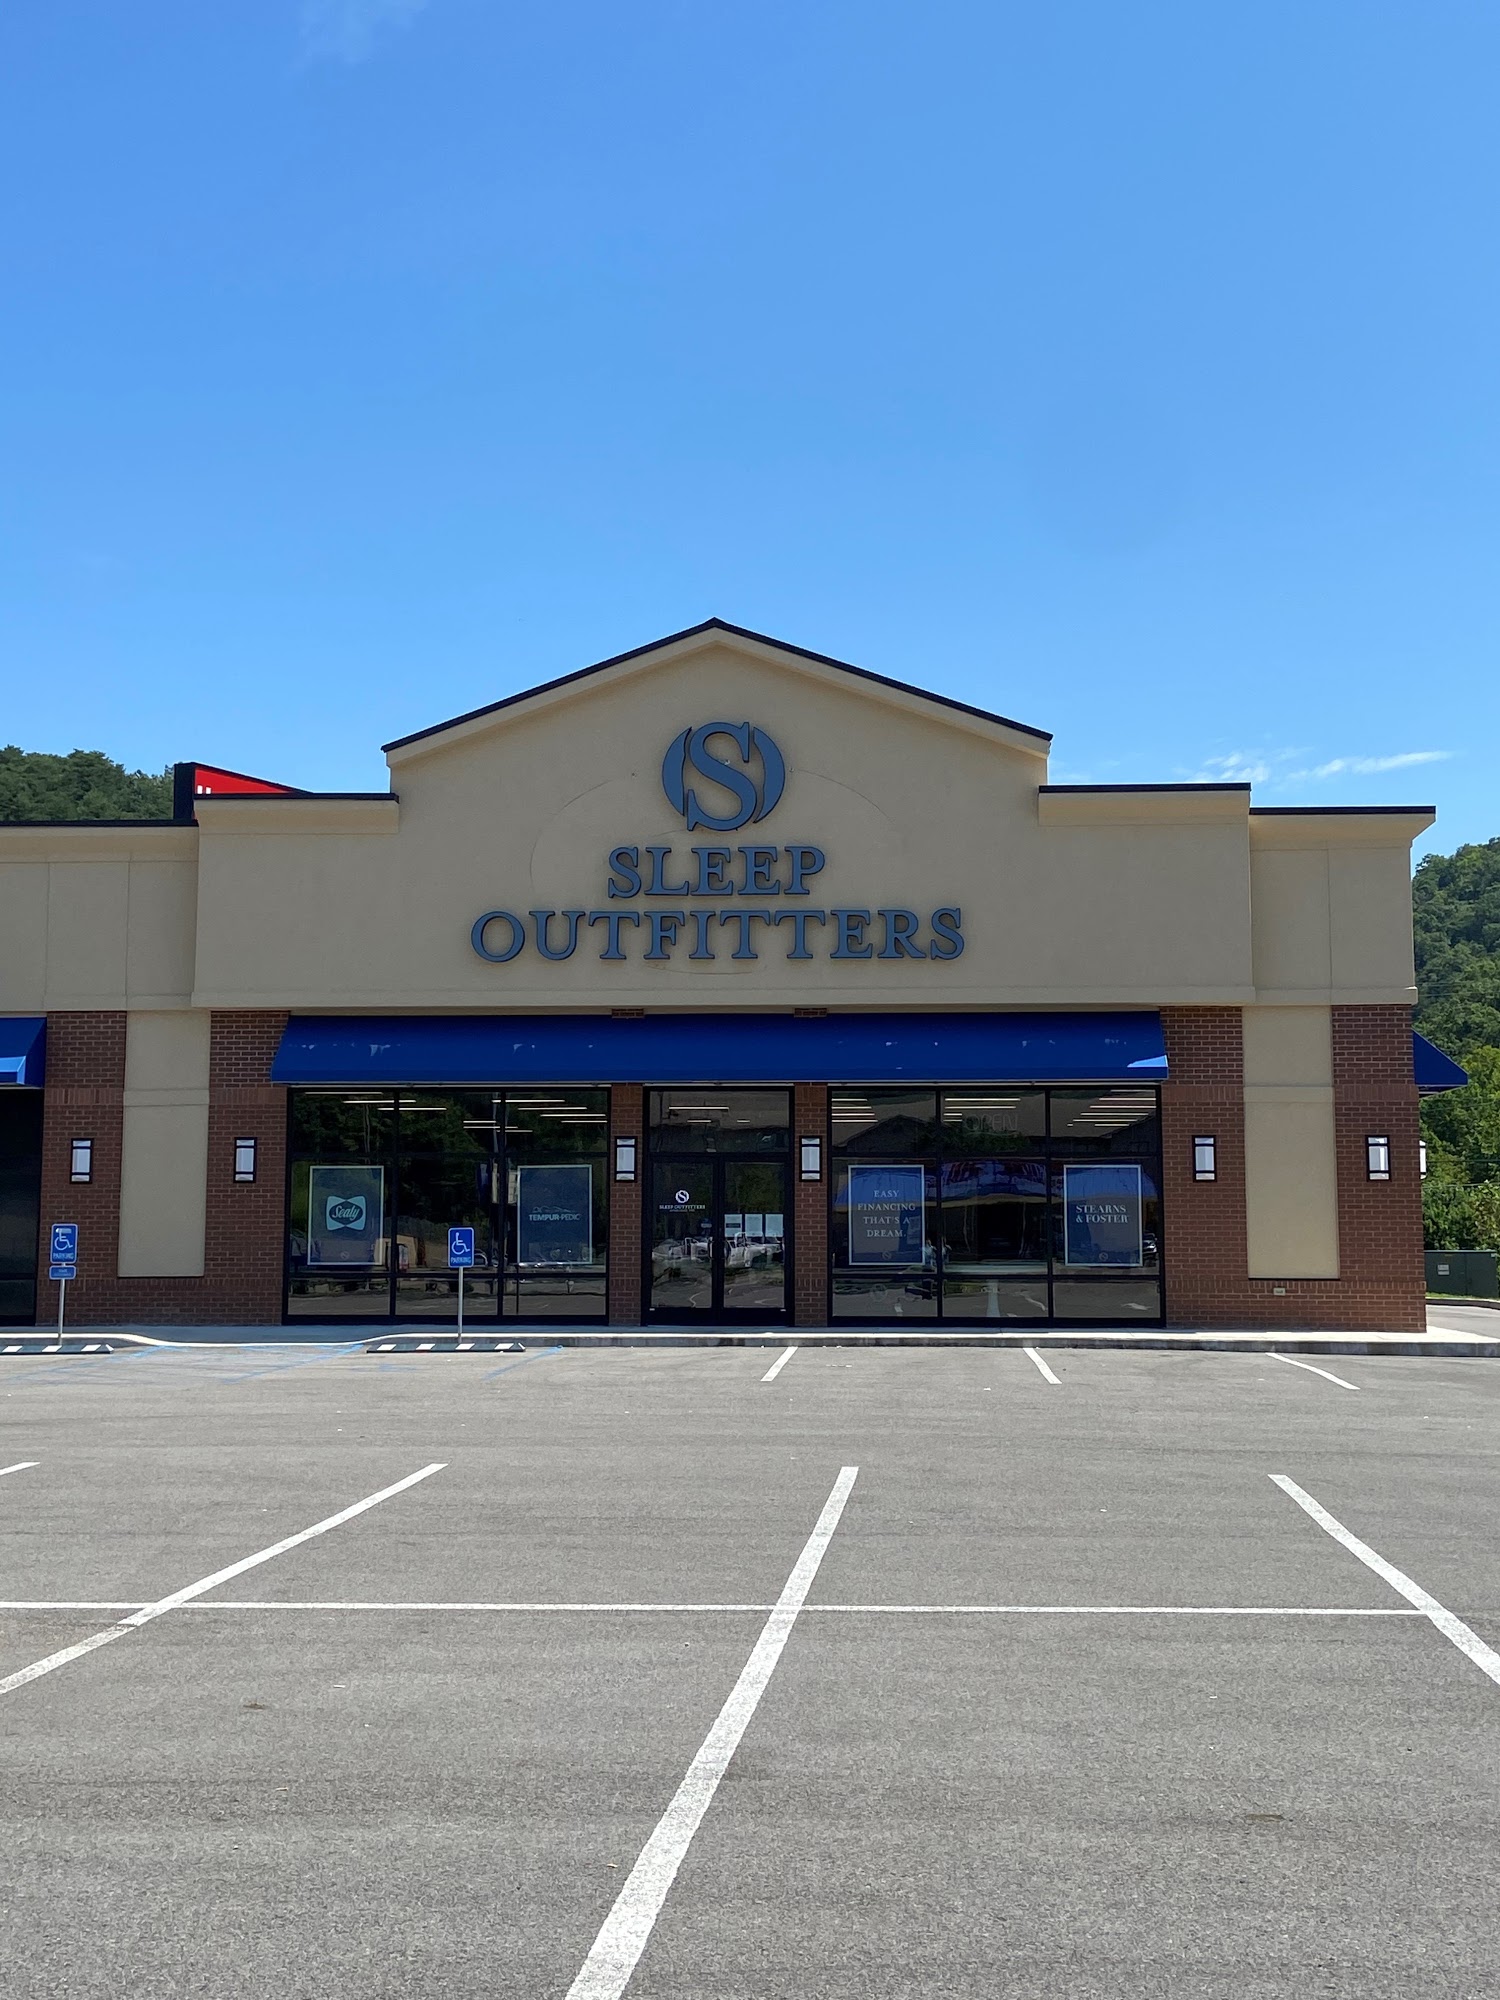 Sleep Outfitters